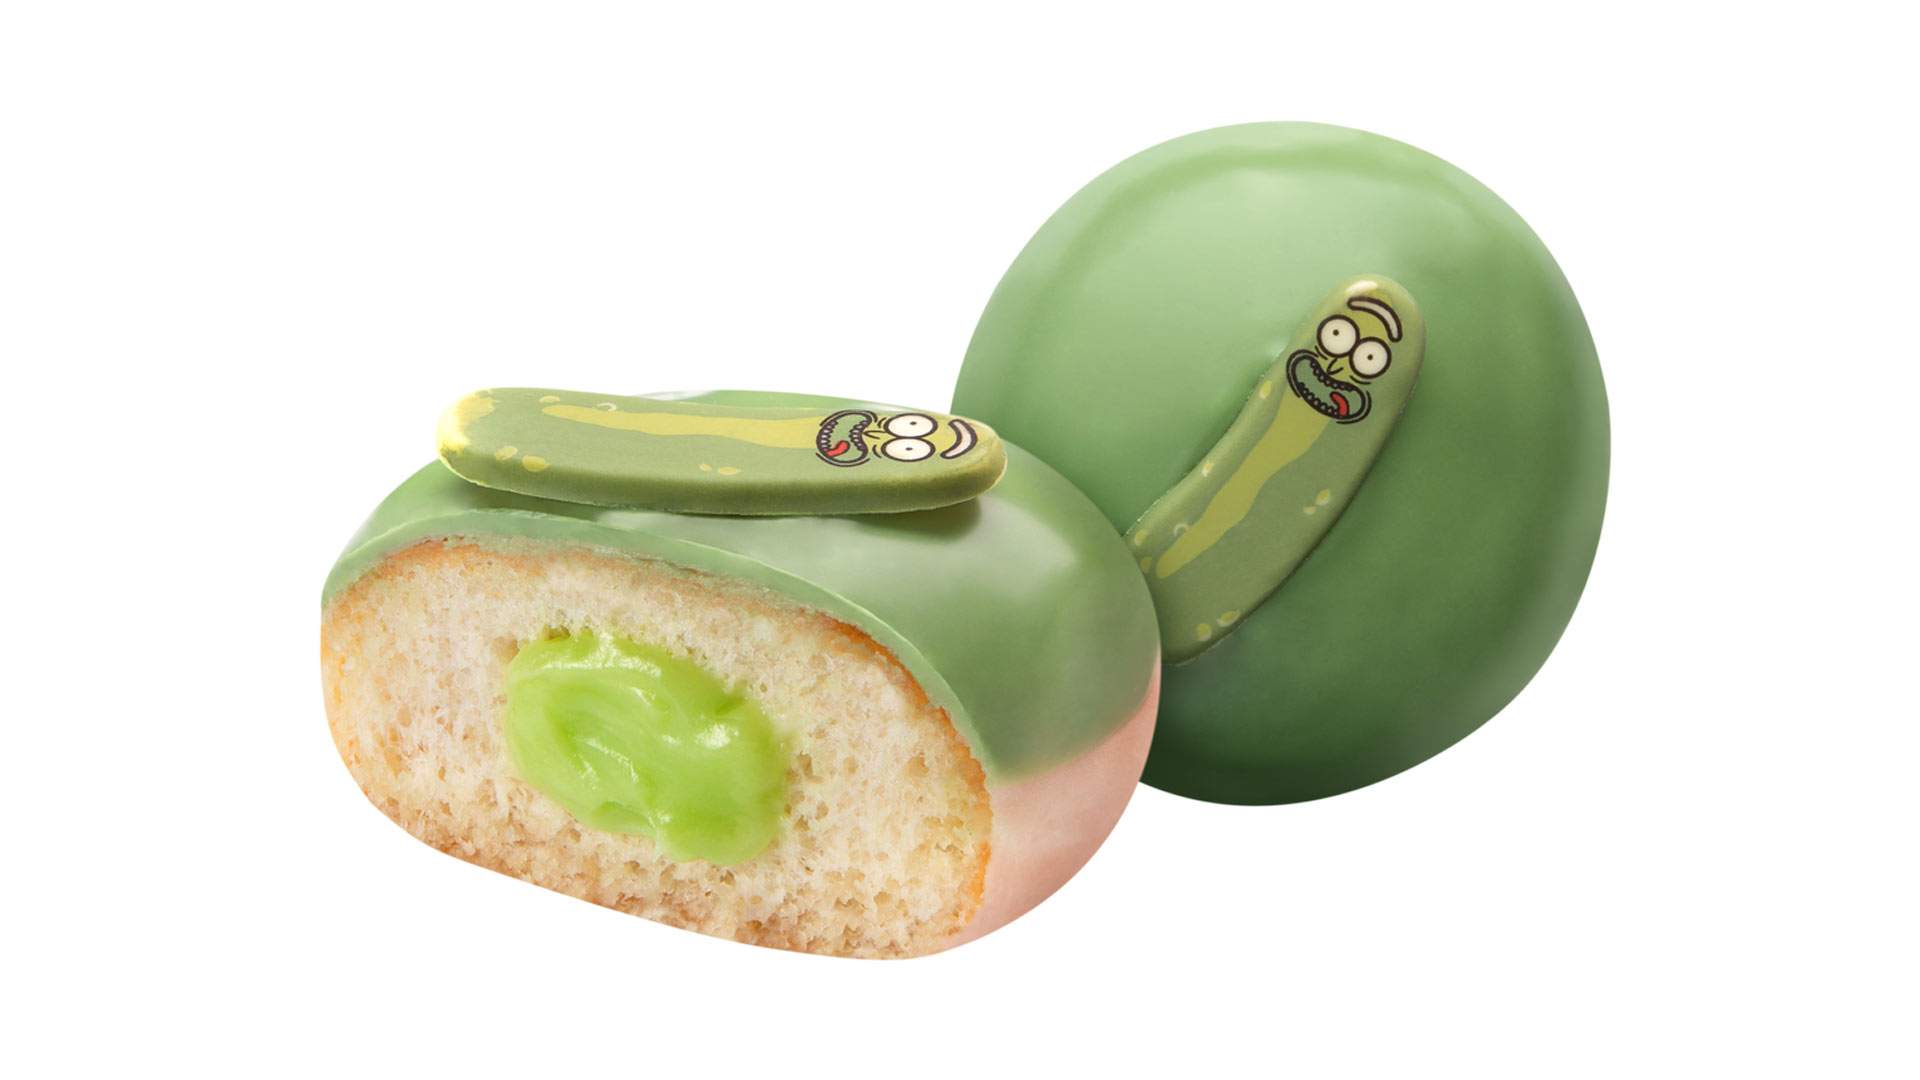 Krispy Kreme Has Just Dropped a Limited-Edition 'Rick and Morty'-Themed Pickle Rick Doughnut